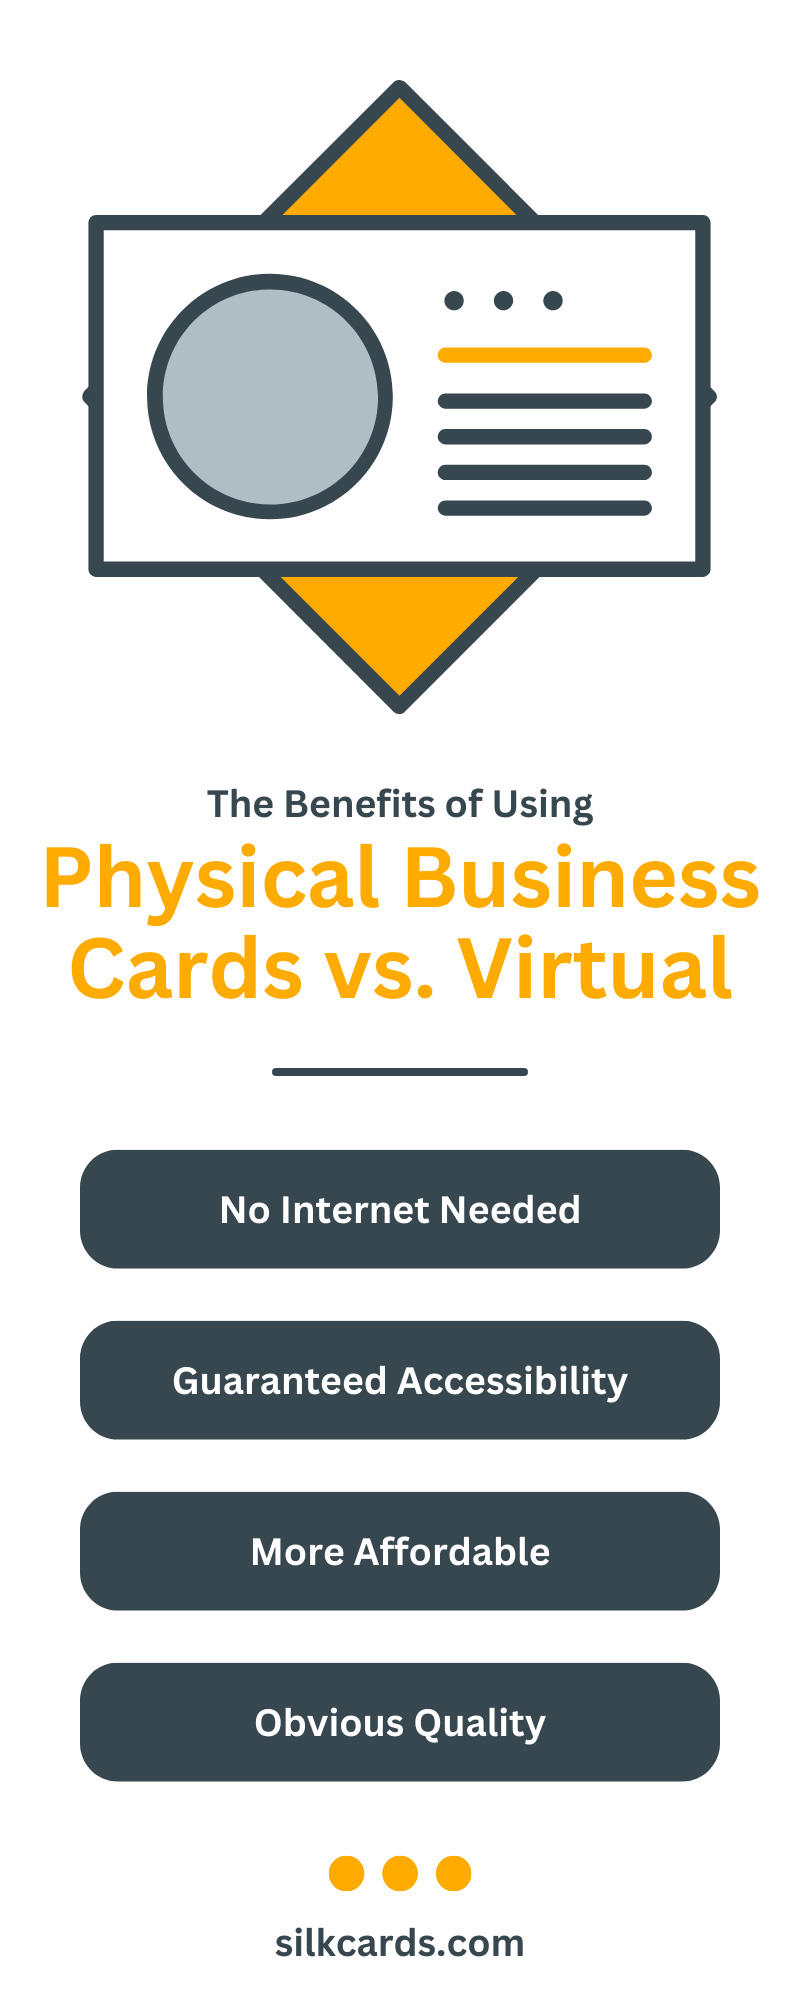 The Benefits of Using Physical Business Cards vs. Virtual